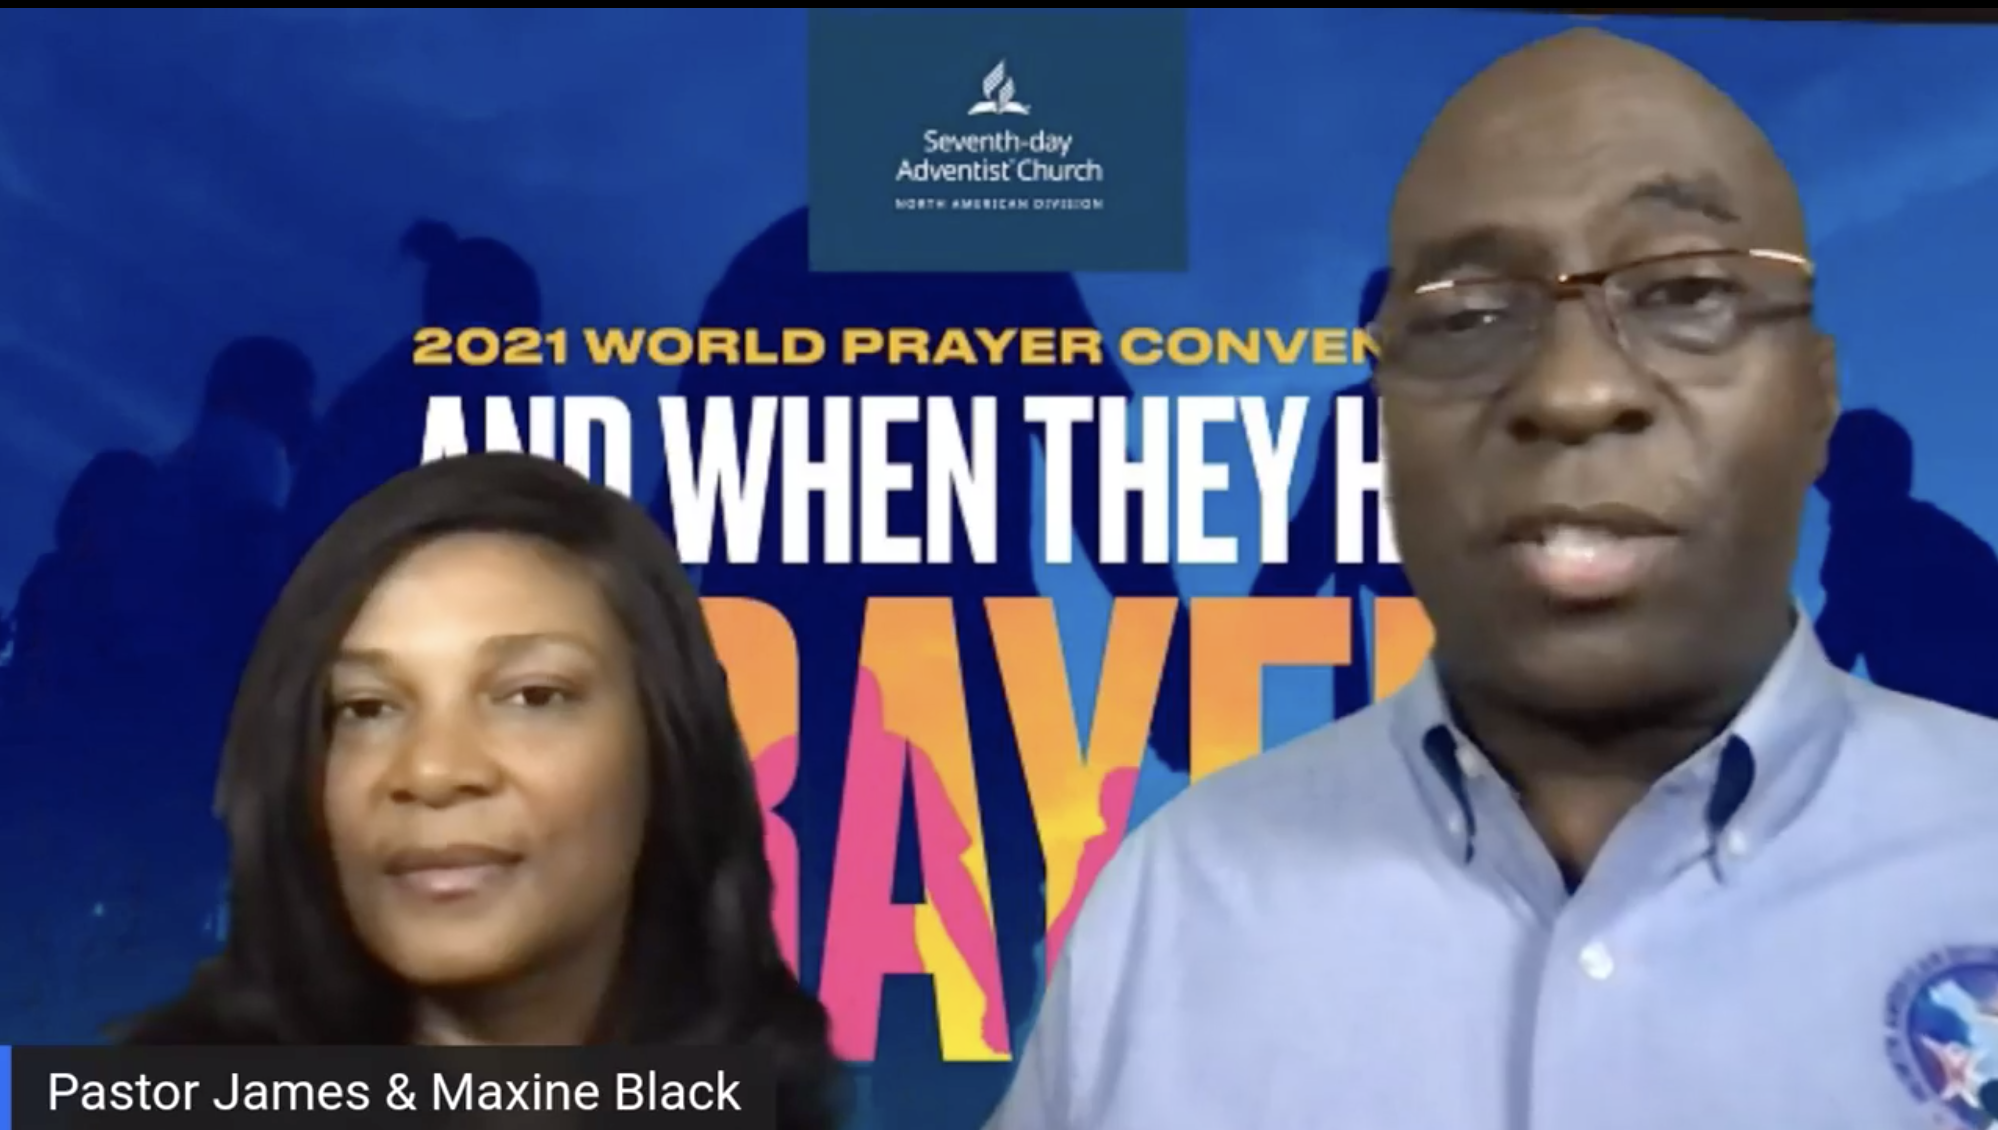 NAD prayer ministries director James Black and his wife Maxine co-host the 2021 World Prayer Convention April 9-10